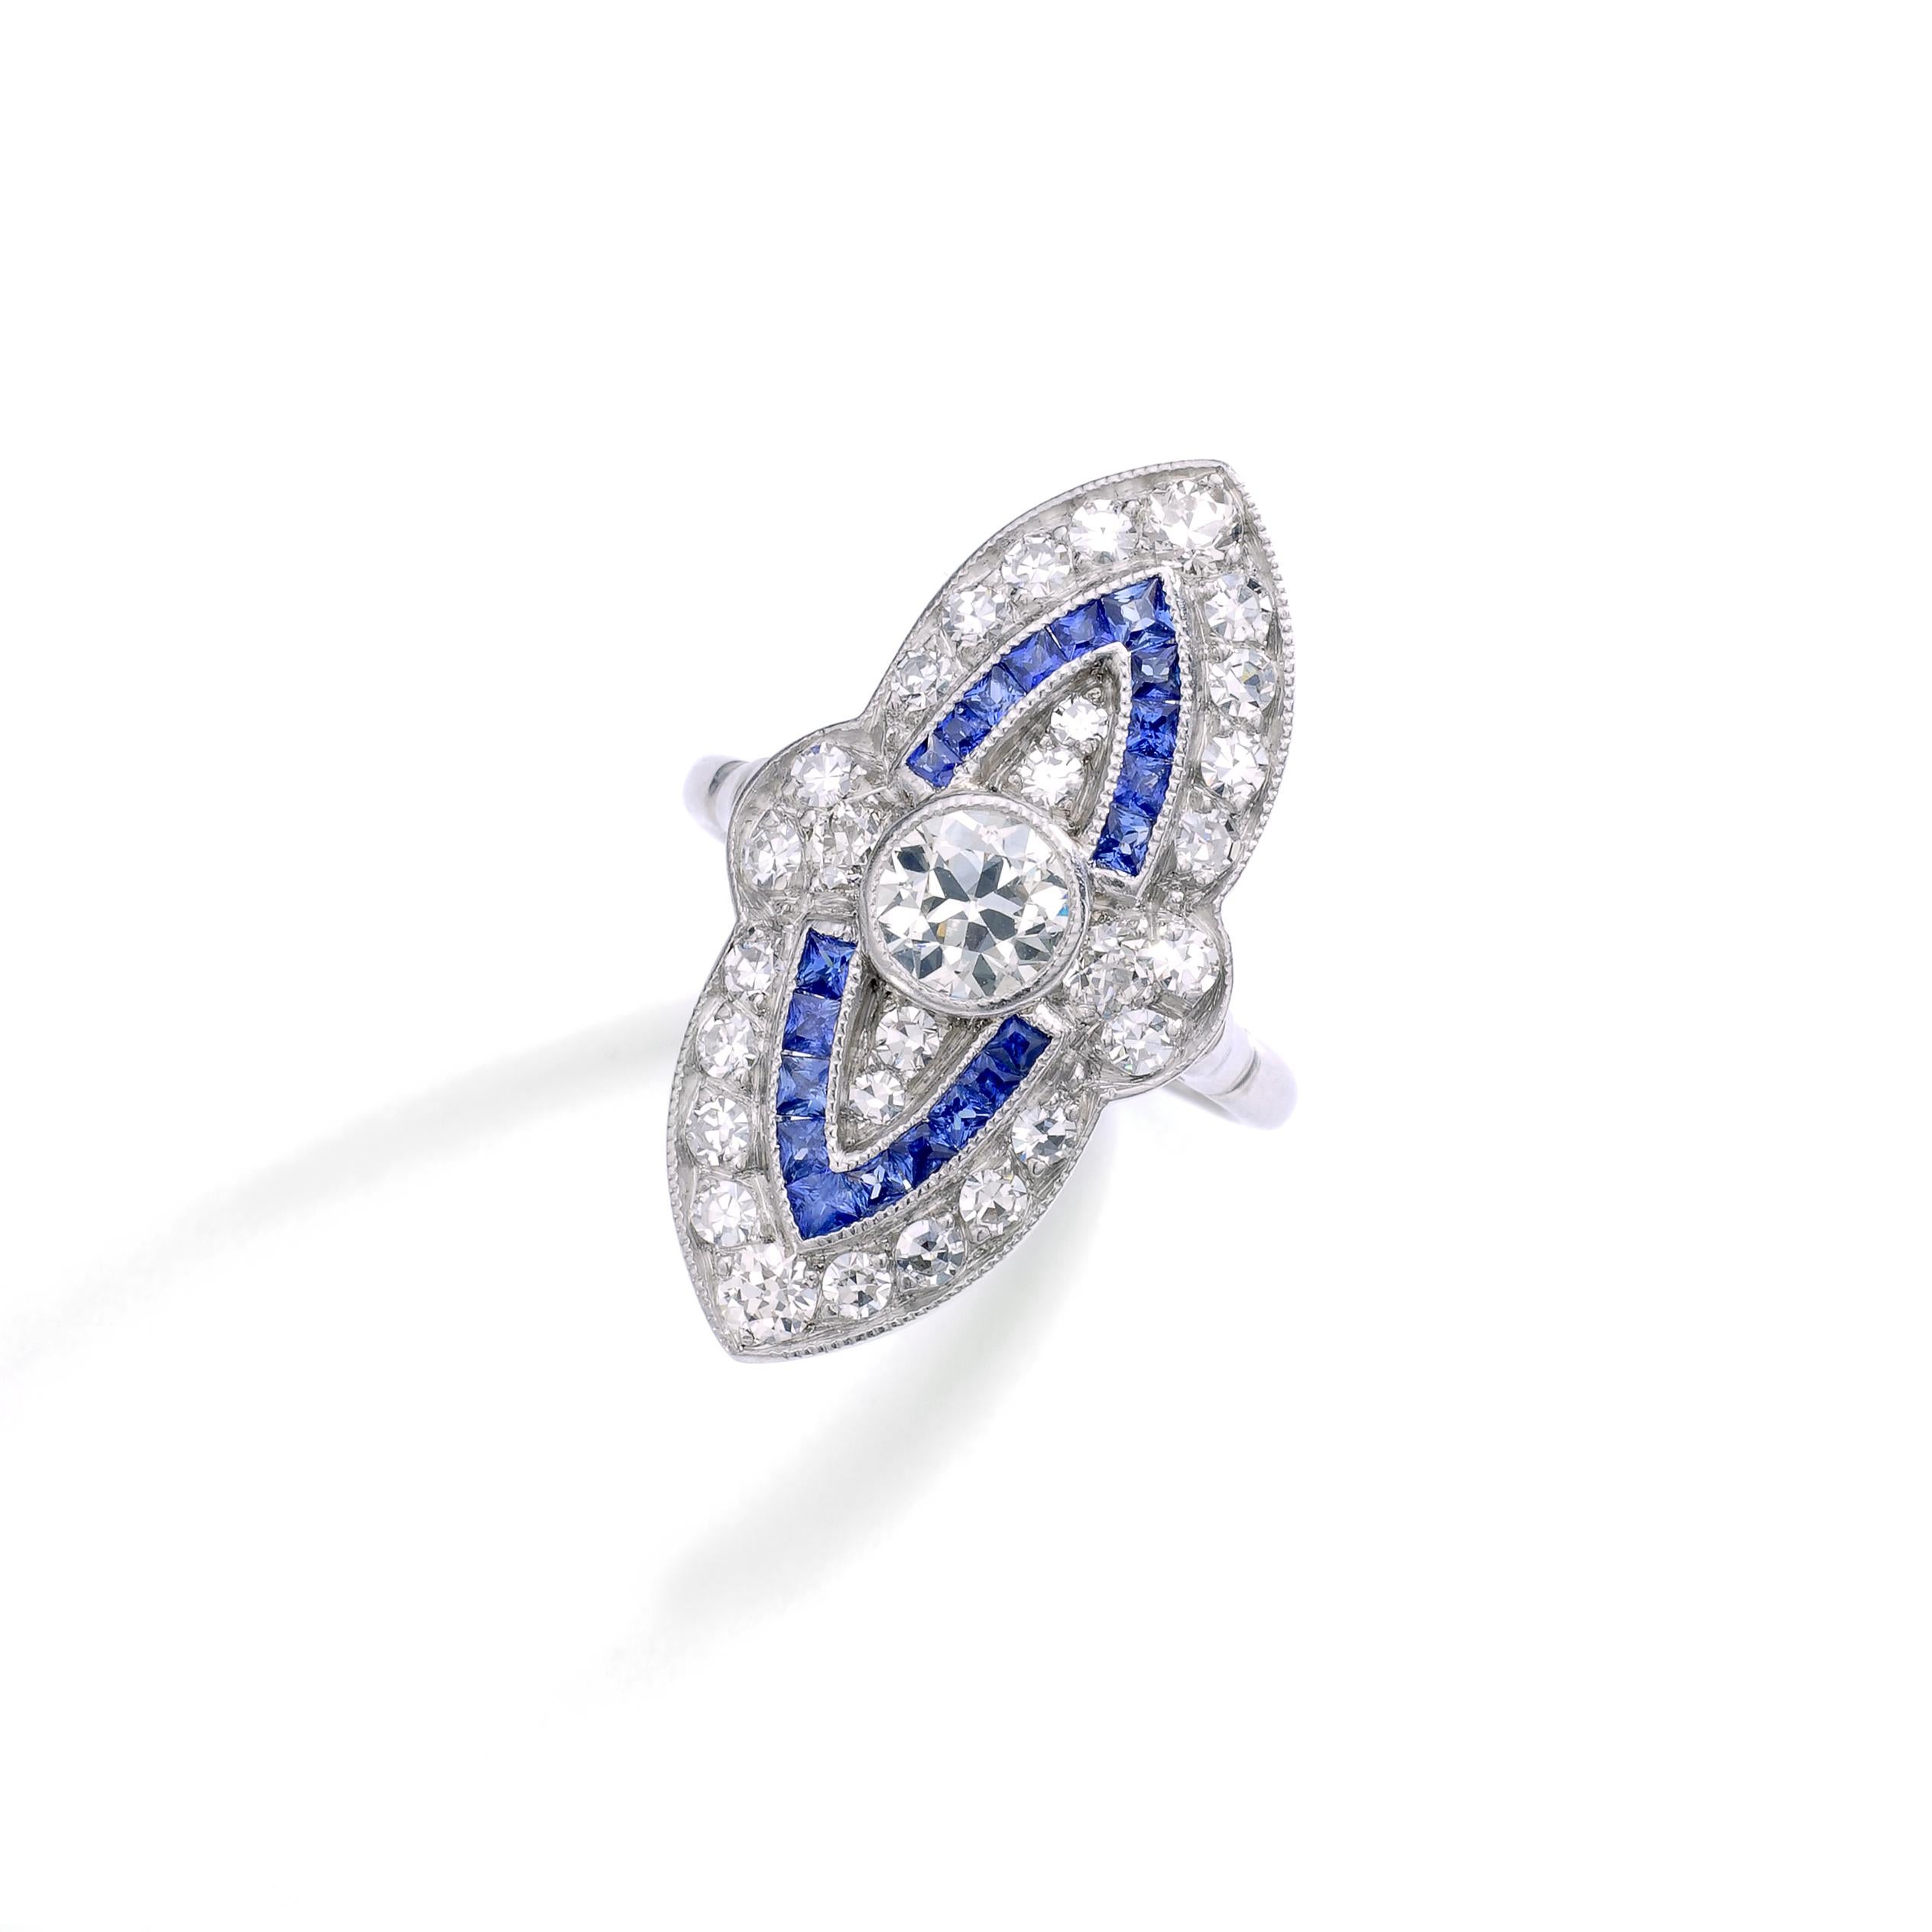 Art Deco design Marquise Diamond and calibrated Sapphire Platinum Ring.
Total Diamond weight: approximately 1.50 carat.

Ring size: 6.